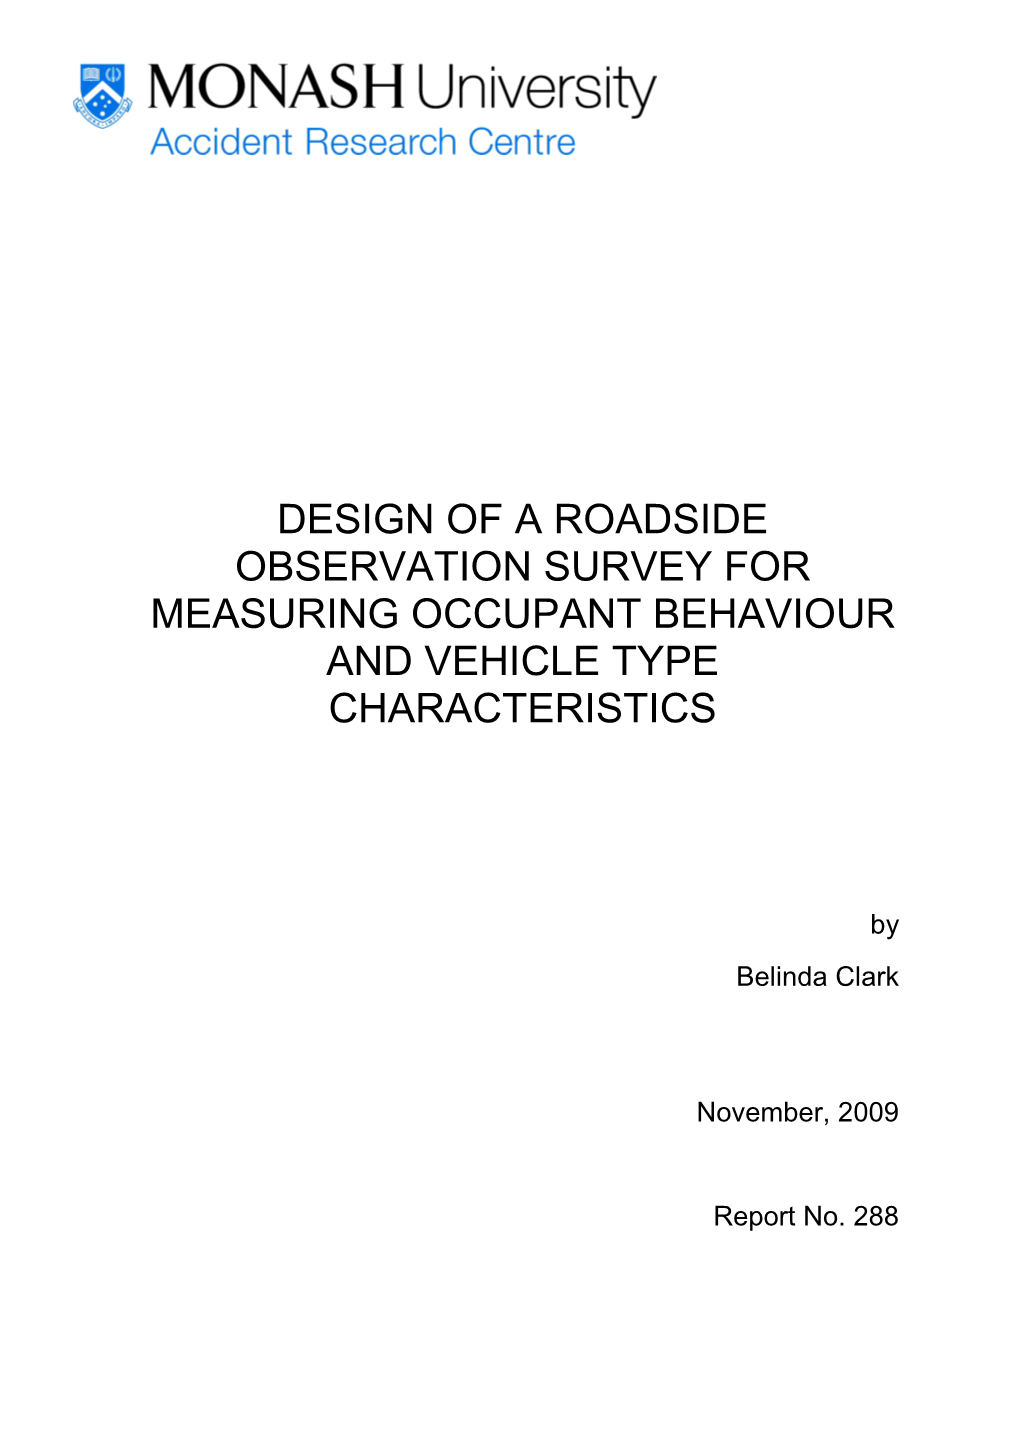 Design of a Roadside Observation Survey for Measuring Occupant Behaviour and Vehicle Type Characteristics